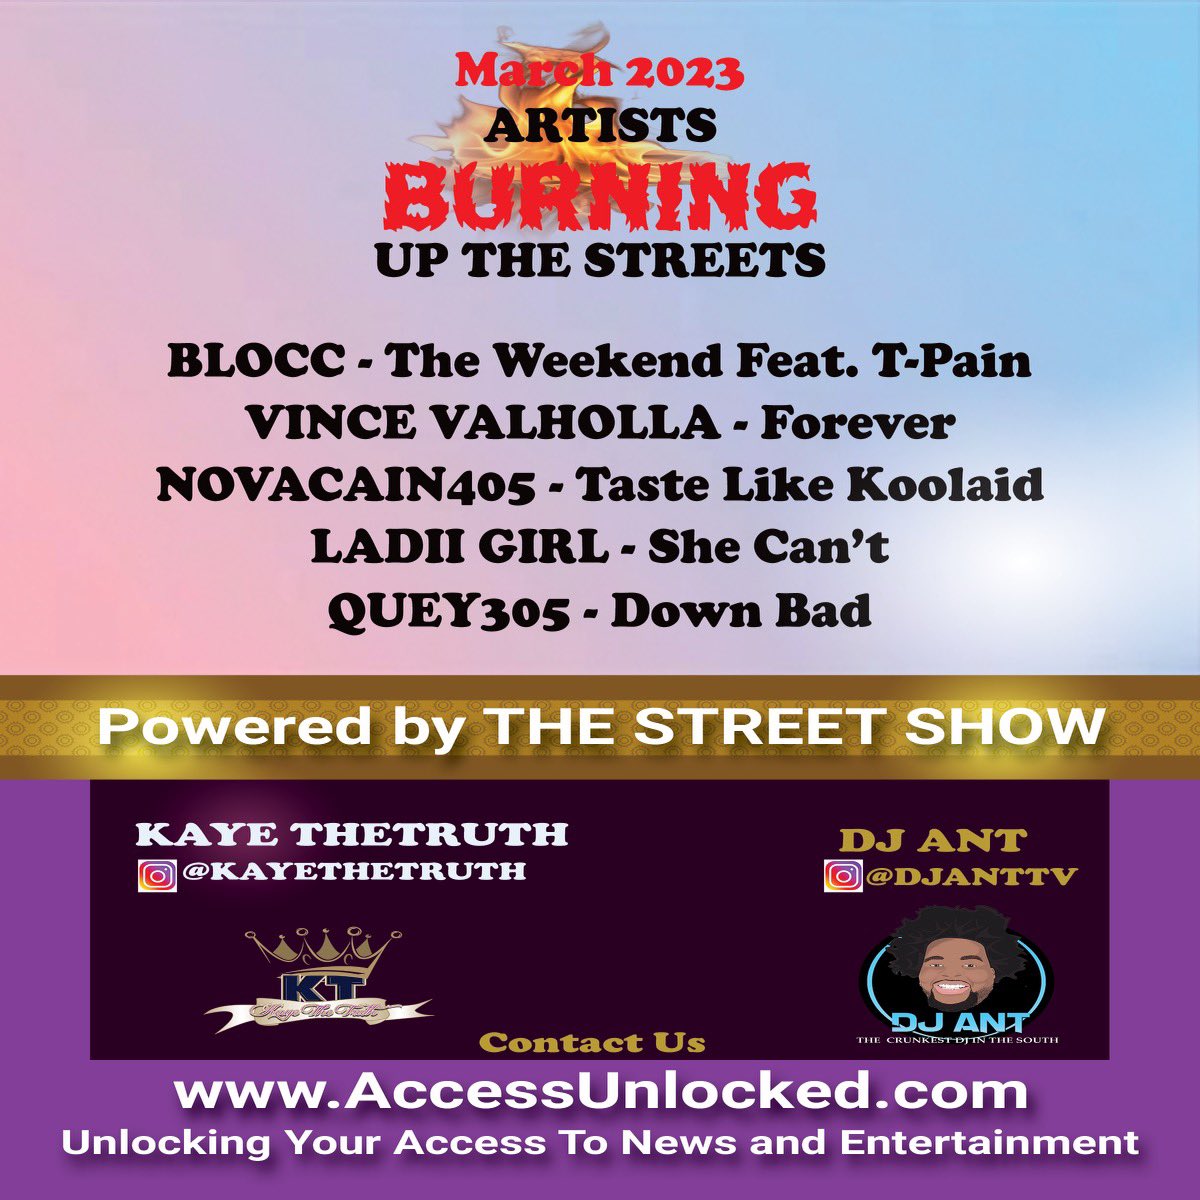 Thanks to @accessunlocked @kayethetruth & @djanttv_ for their continued support of “FOREVER” with @adnlewis (@vinceandthe) #accessunlocked #kayethetruth #djant #thestreetshow